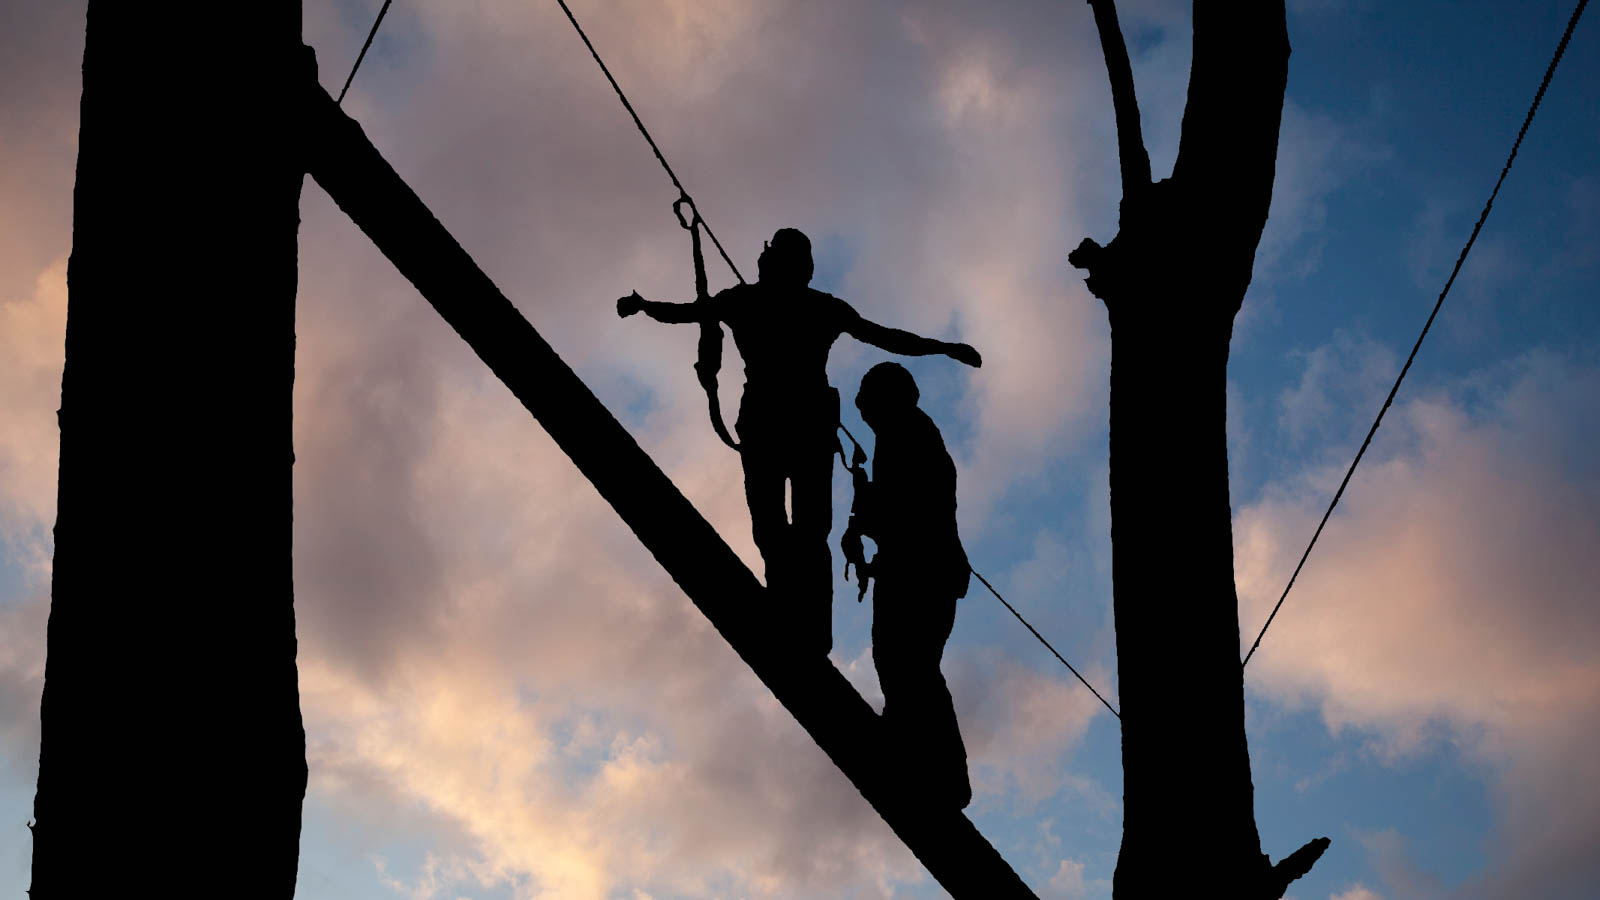 Adventure Designs builds high-value, high-quality, exciting challenge ropes courses!